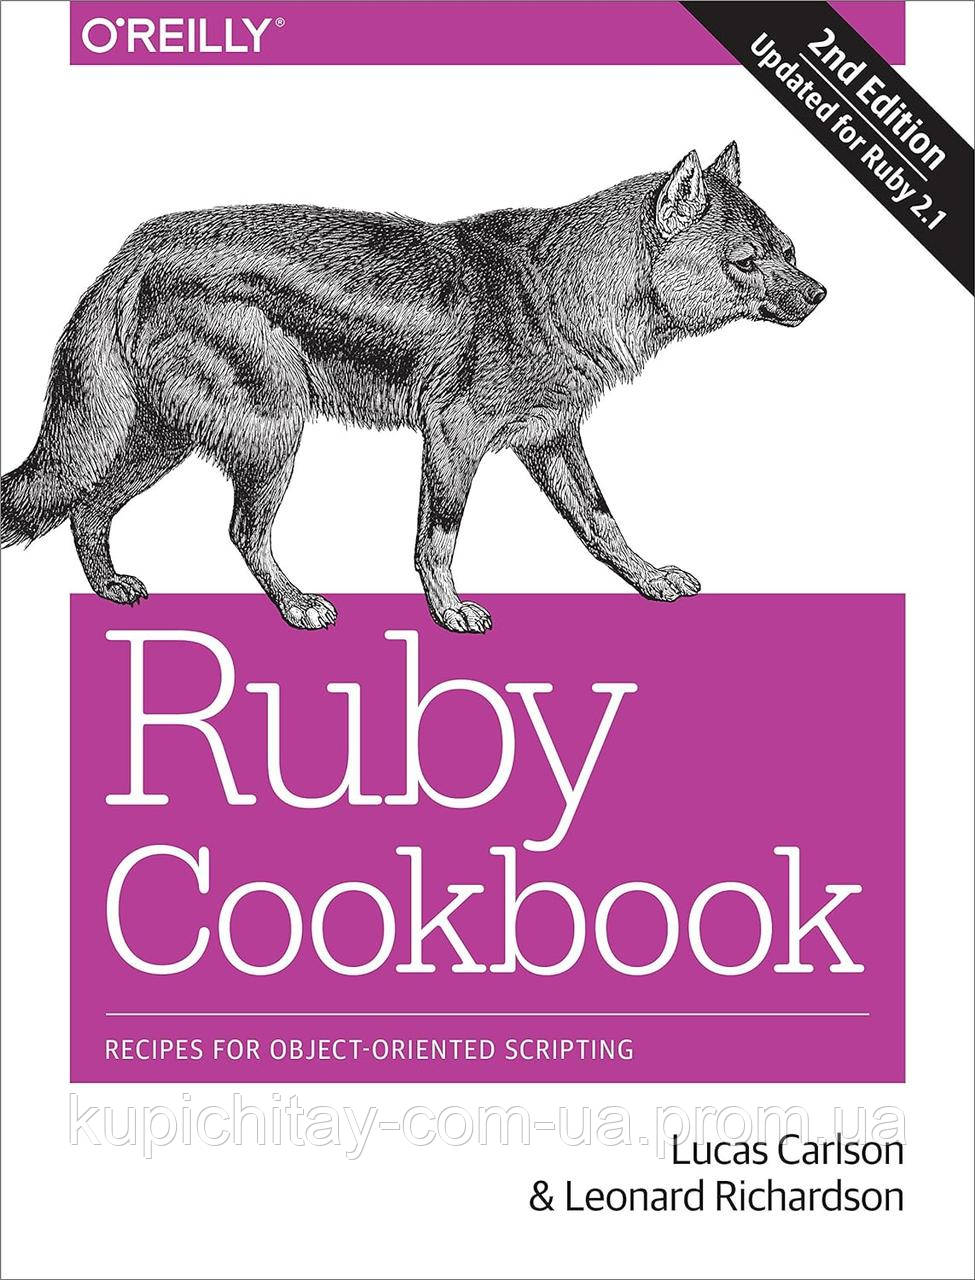 Ruby Cookbook: Recipes for Object-Oriented Scripting 2nd Edition, Lucas Carlson, Leonard Richardson